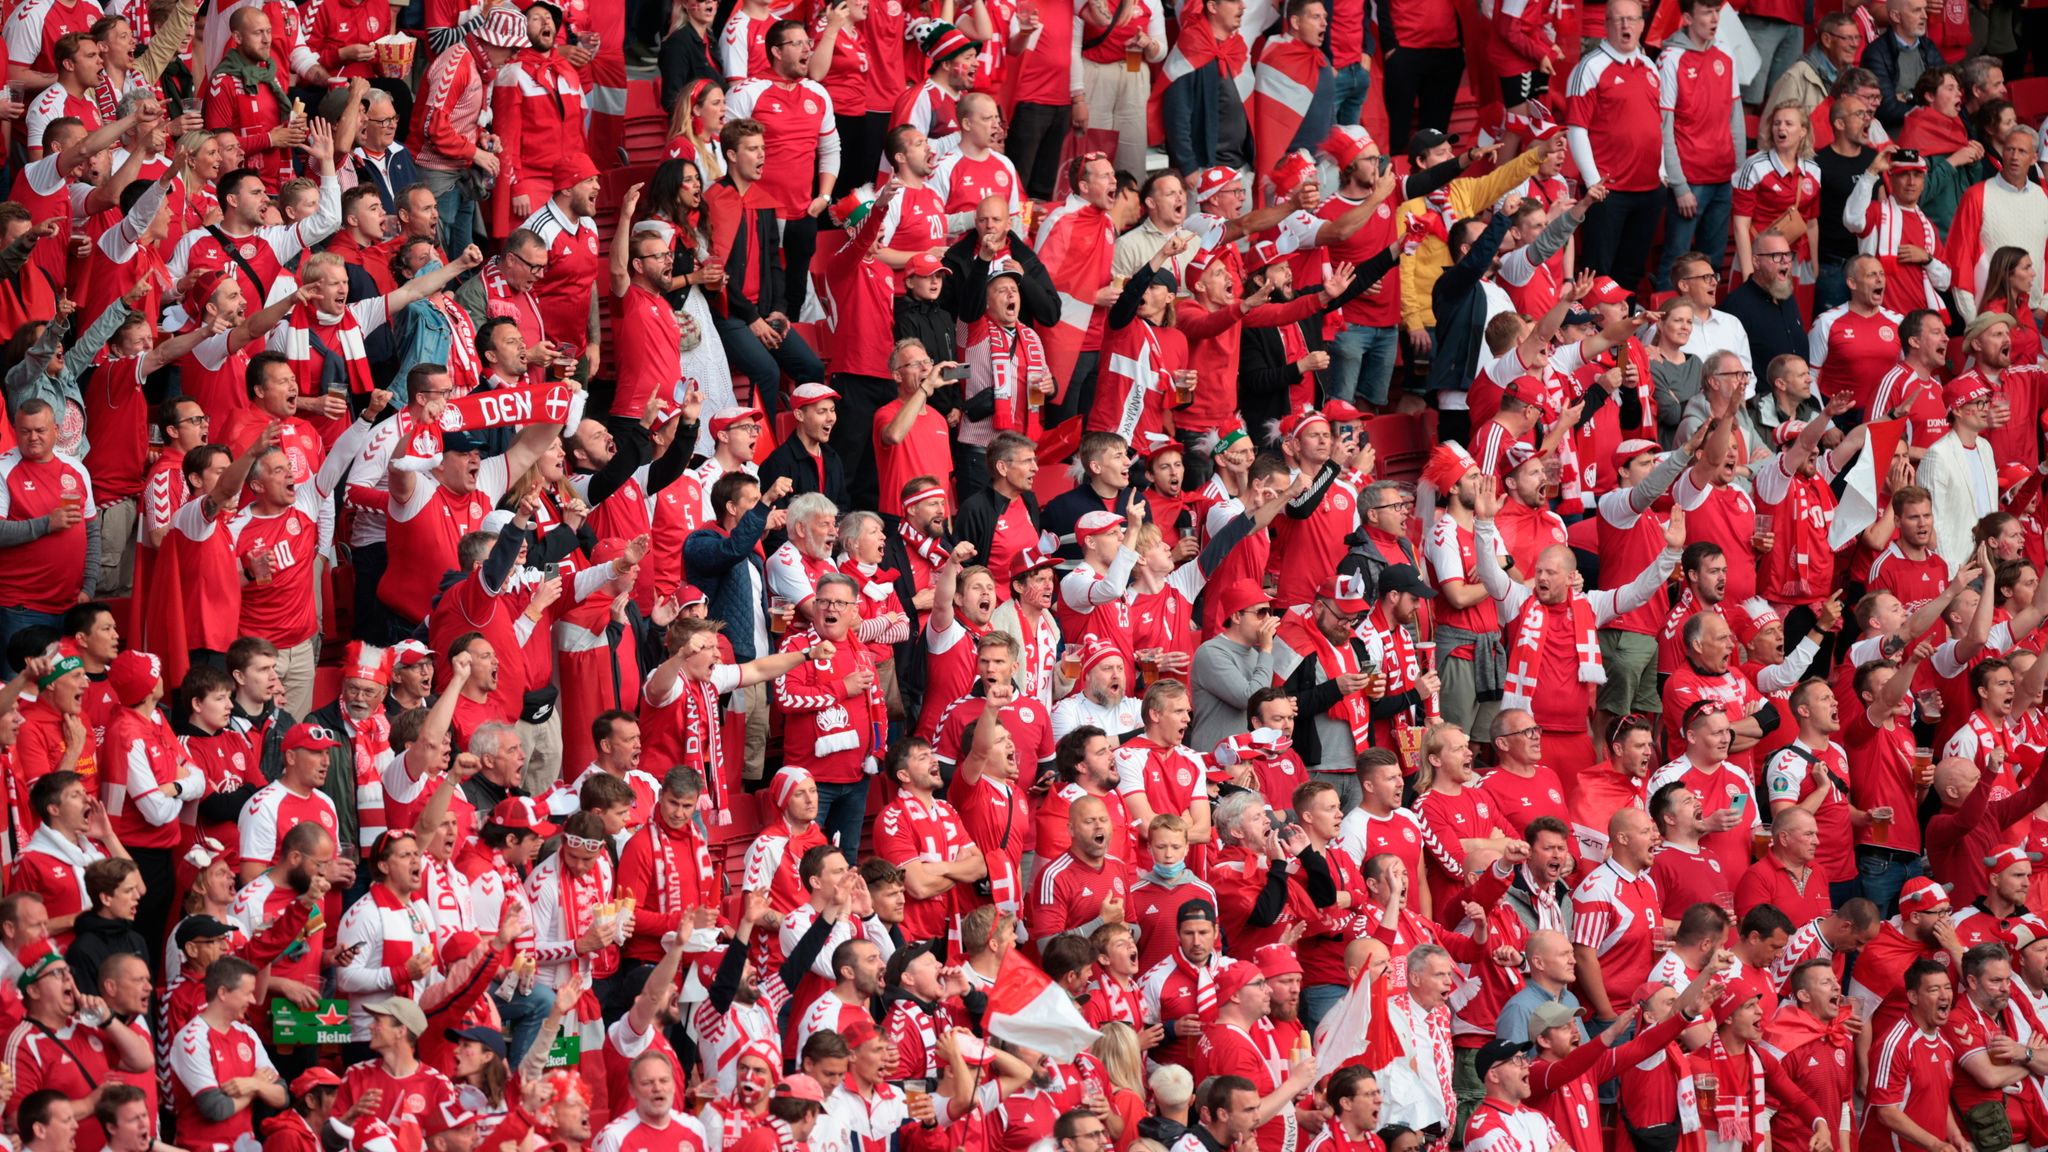 Euro 2020: Denmark fans told they can travel to Amsterdam but Wales fans banned from attending last-16 tie | Football News Sky Sports